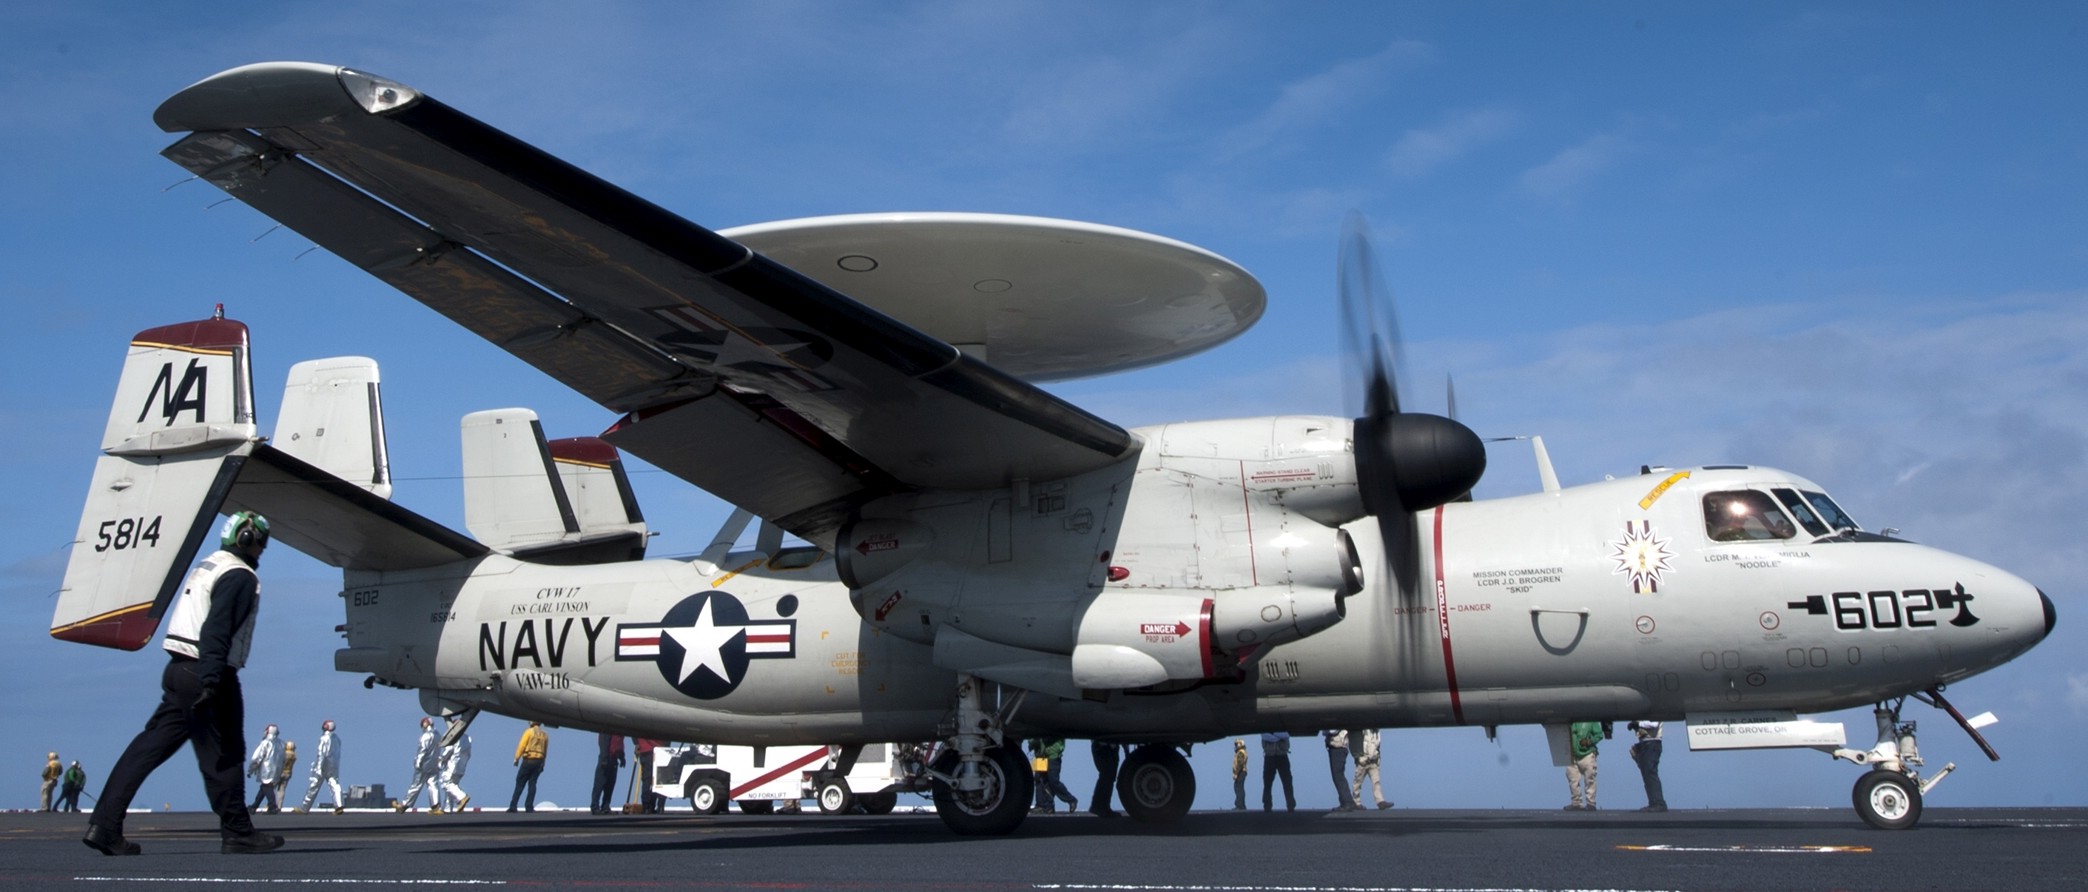 vaw-116 sun kings airborne command control squadron carrier early warning cvw-17 uss carl vinson cvn-70 33